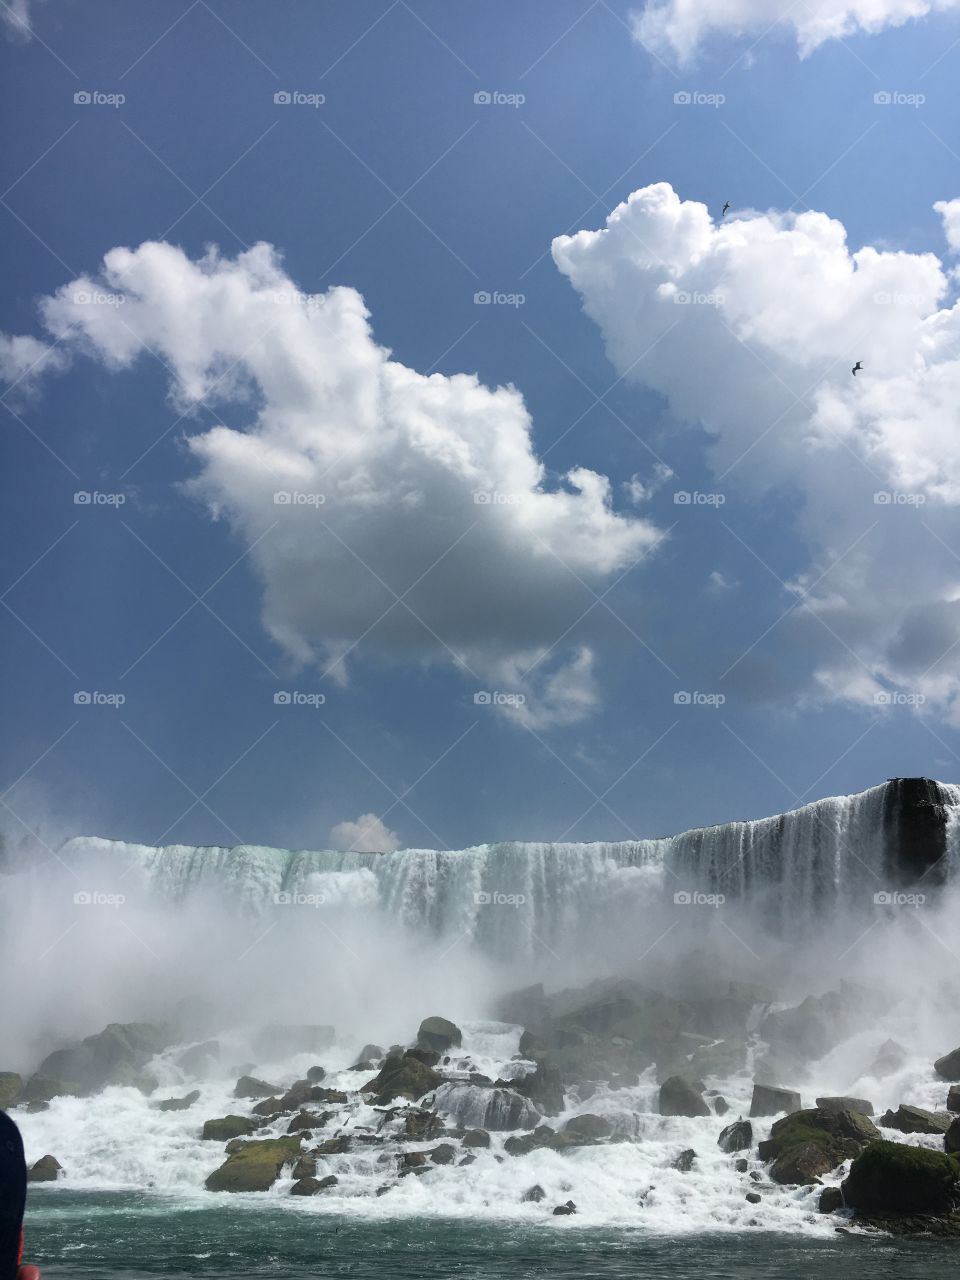 Nice photo of clouds and the falls.